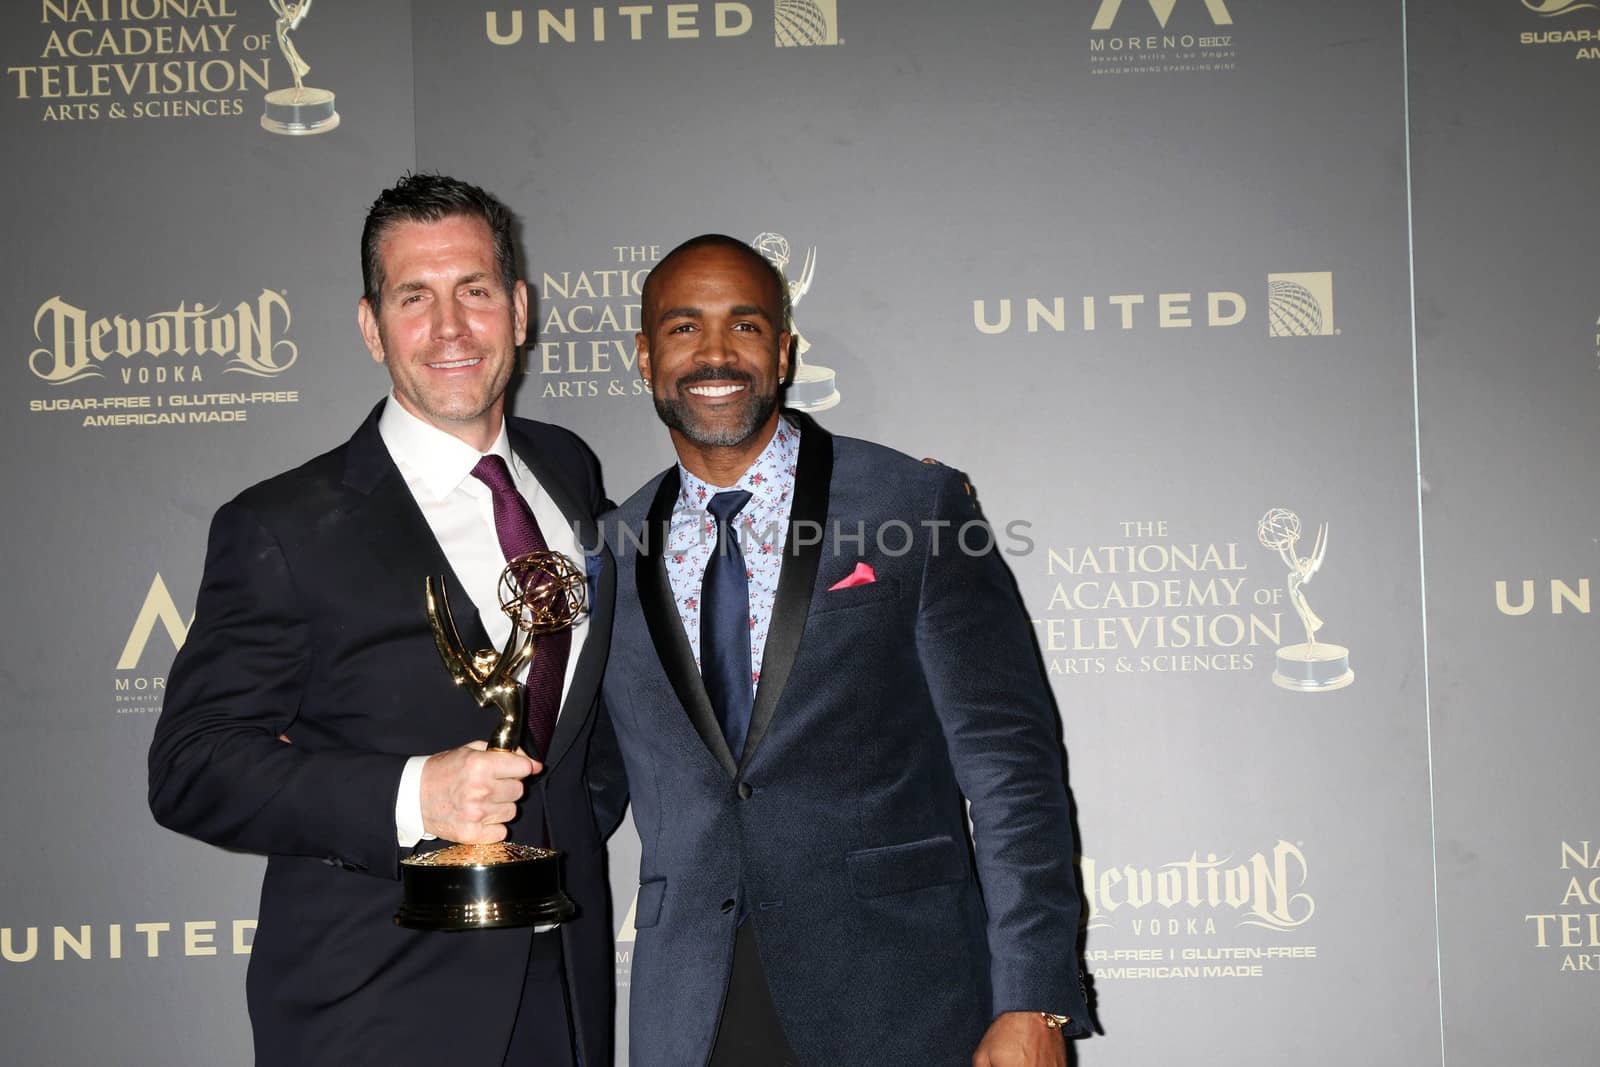 Frank Valentini, Donnell Turner, Outstanding Drama Series, General Hospital
at the 44th Daytime Emmy Awards - Press Room, Pasadena Civic Auditorium, Pasadena, CA 04-30-17